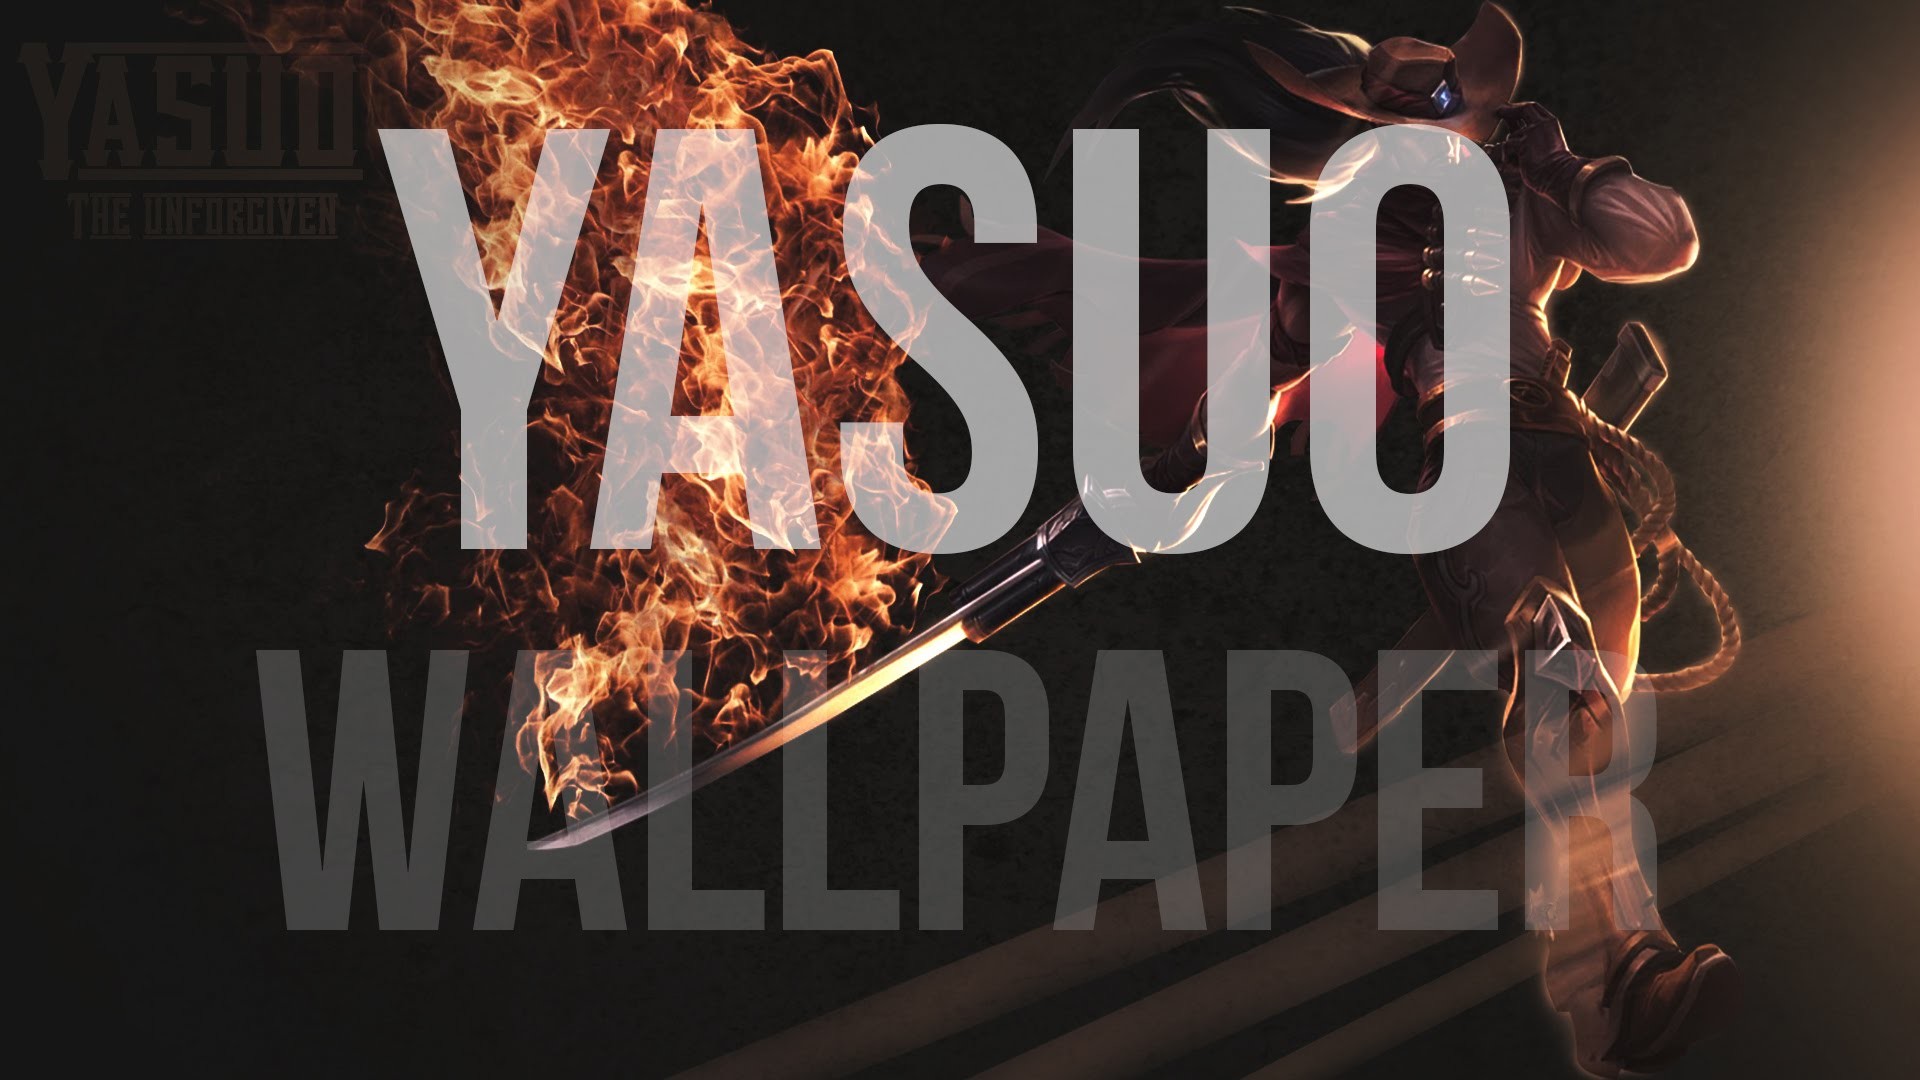 1920x1080 Wallpaper in Photoshop - League of Legends (High Noon Yasuo)